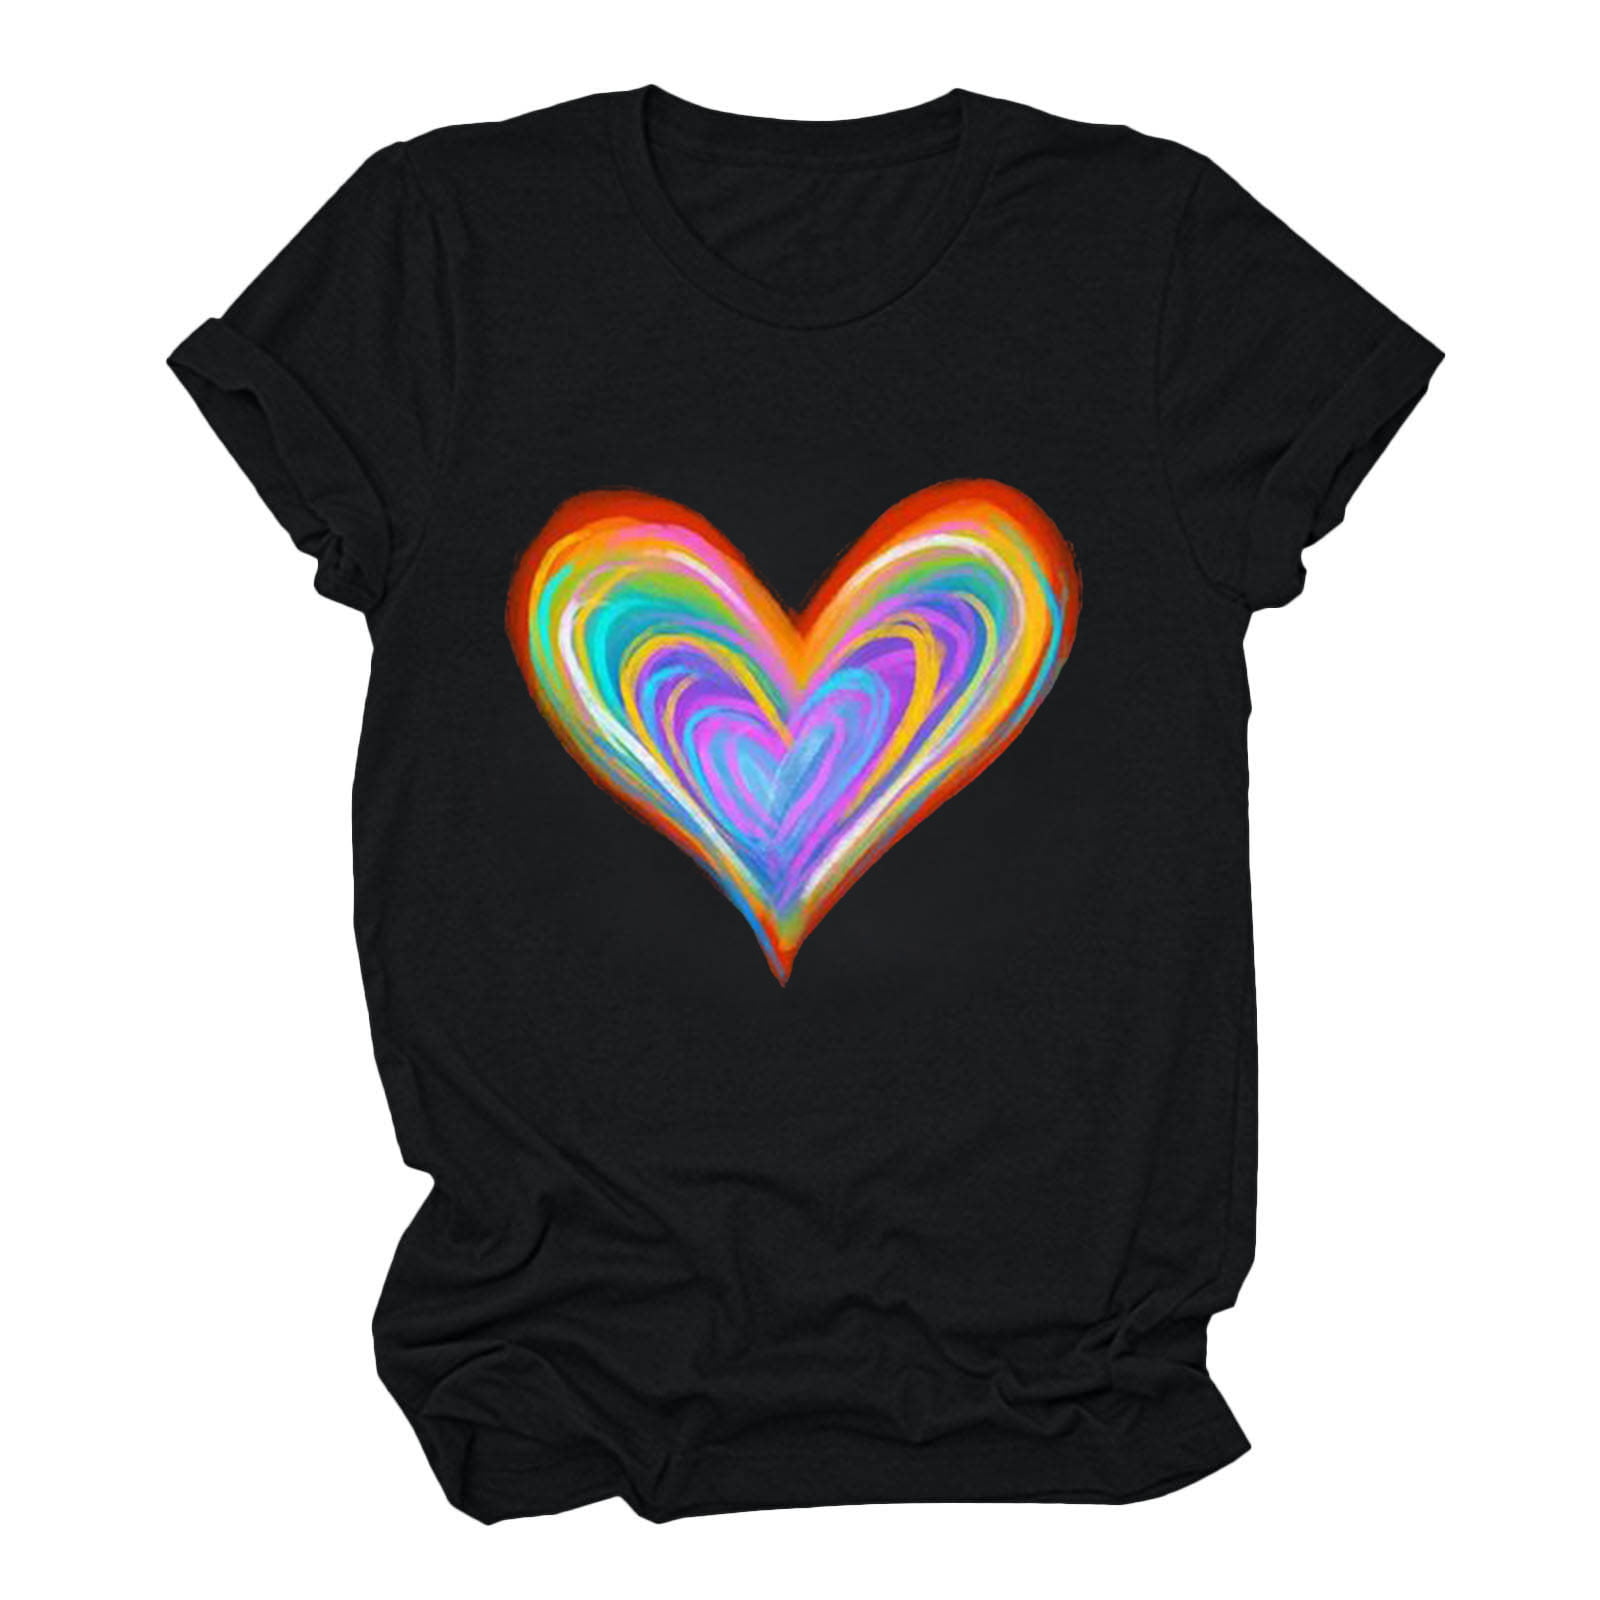 Pride Shirt Women Be You T-Shirt Rainbow Graphic Tee LGBT Equality Short Sleeve Tops